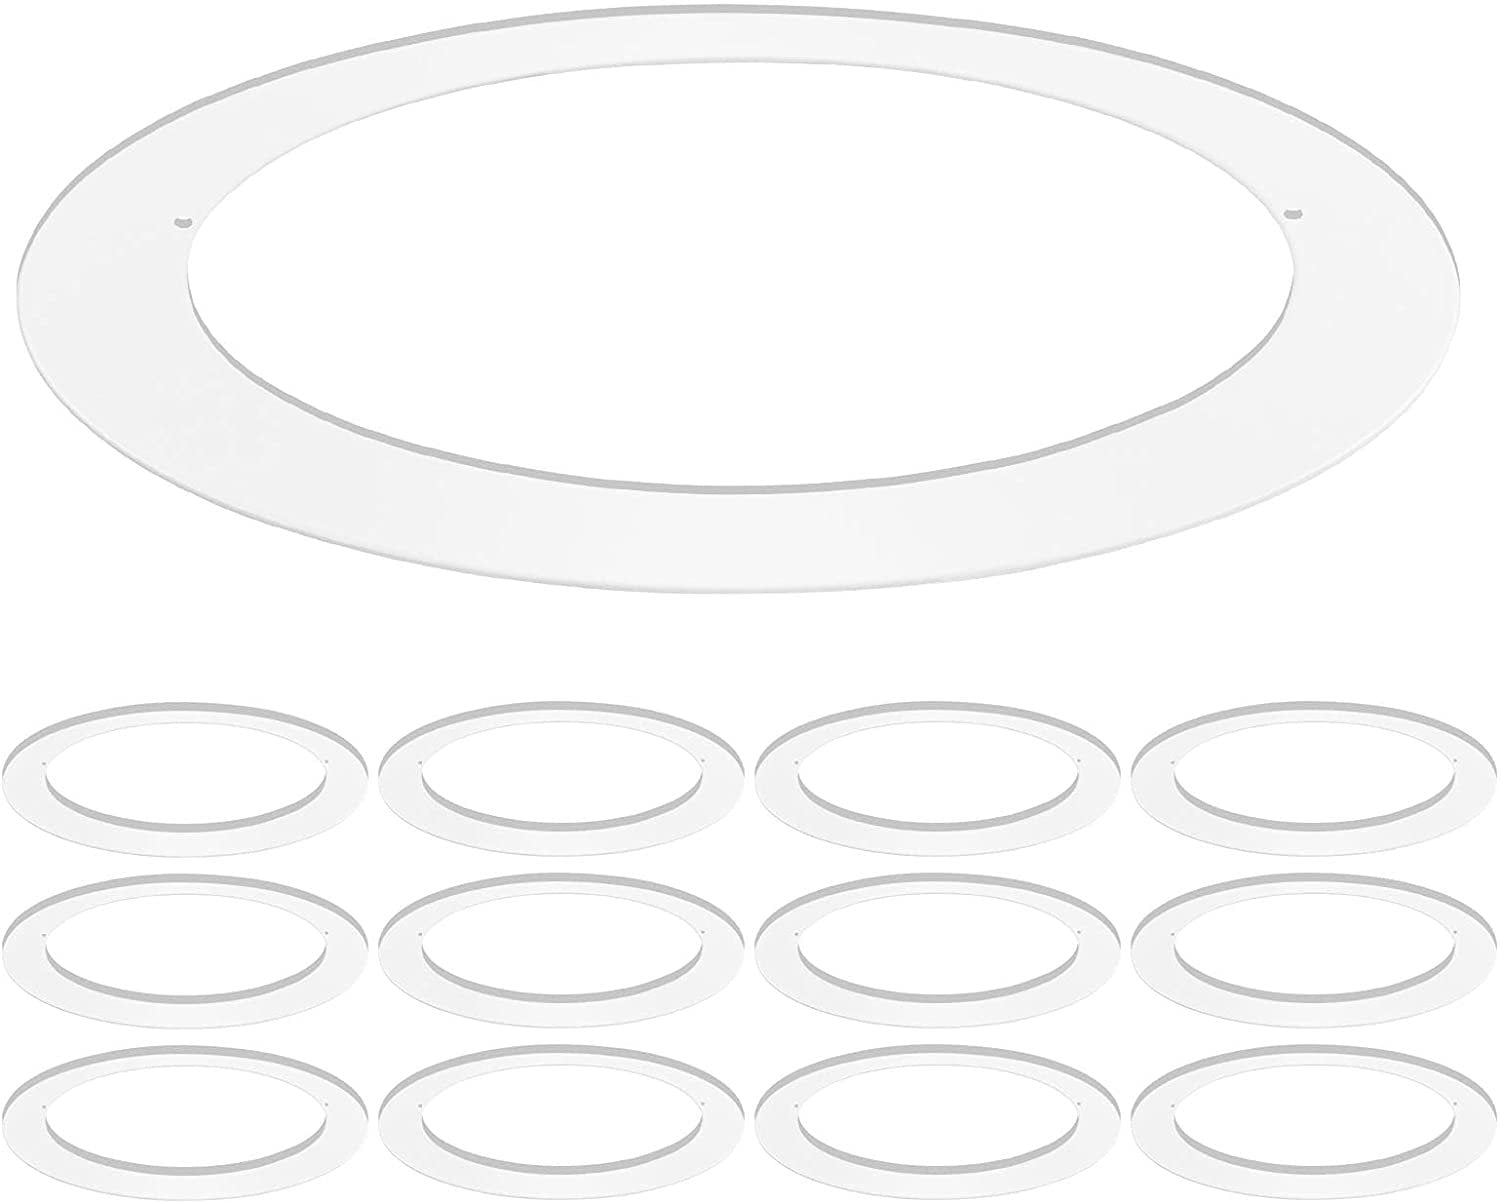 6" INCH OVER SIZE TRIM RING WHITE GOOF RING FOR RECESSED CAN LIGHT  24 PACK 